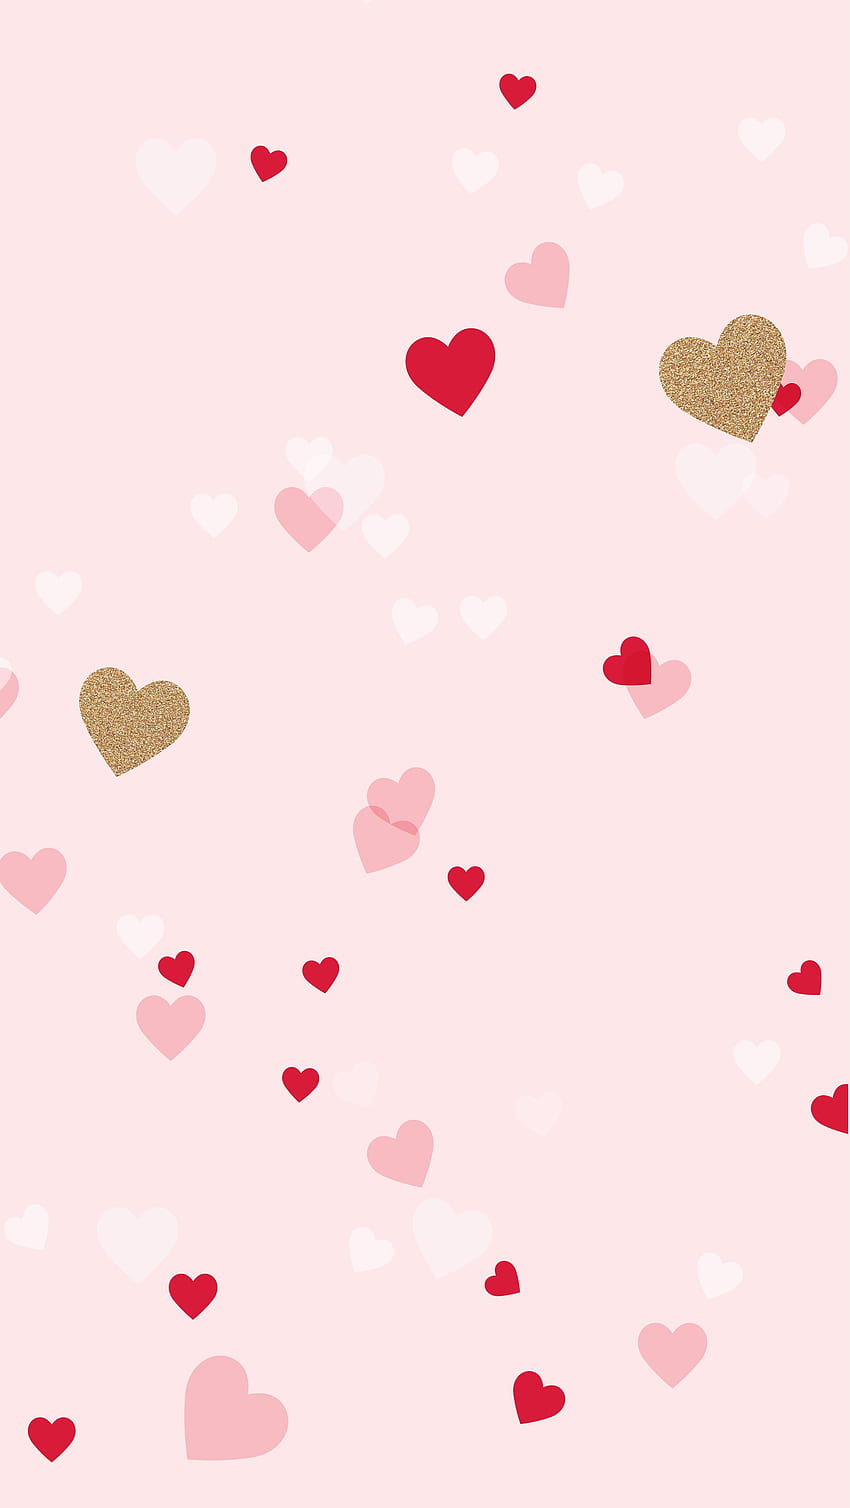 Girly Background for Phones. Girly , Cute Girly and Vintage Girly, Super Cute Girly HD phone wallpaper